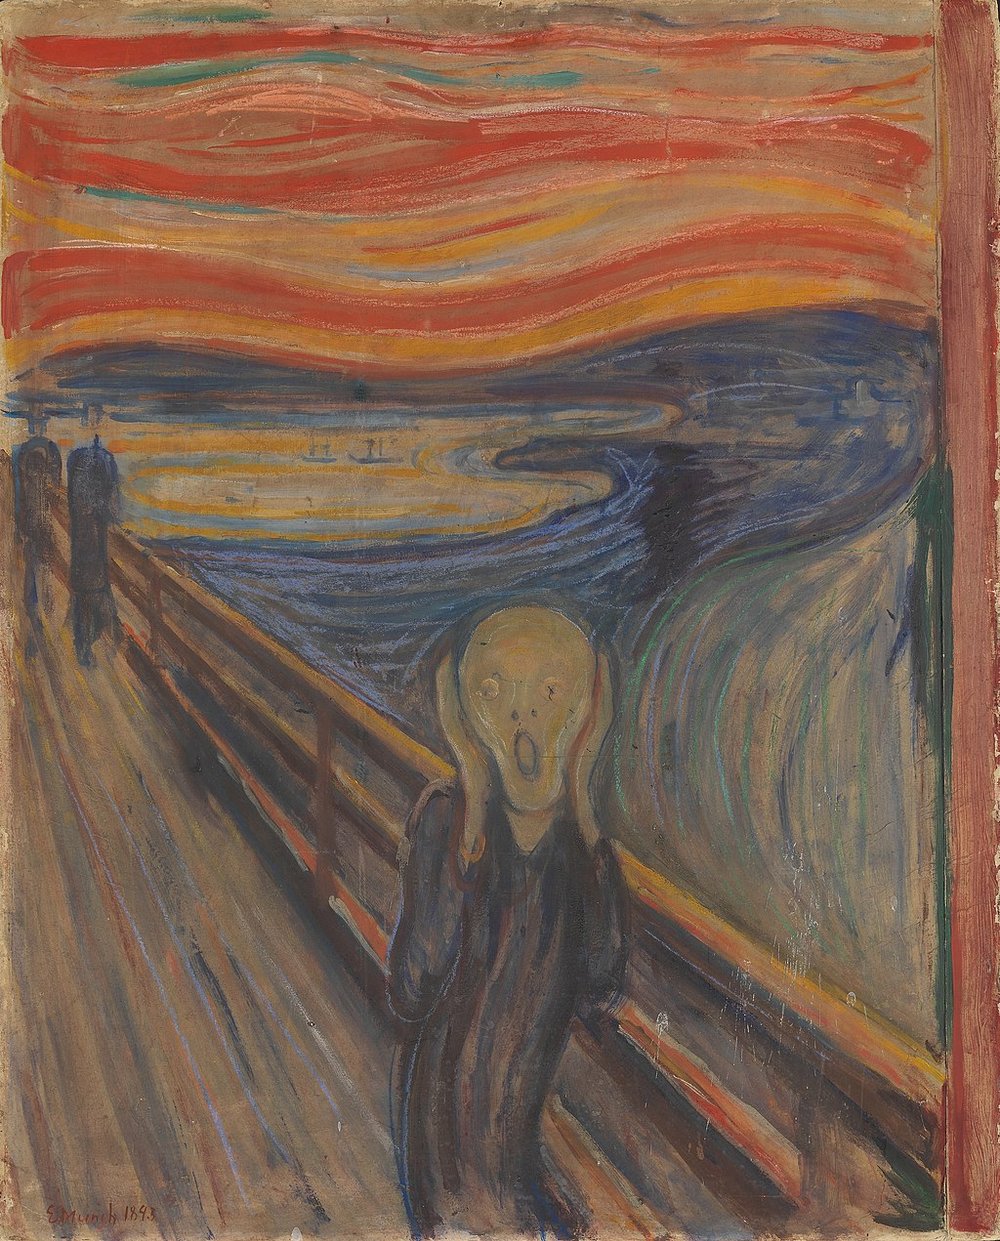 Edvard_Munch,_1893,_The_Scream,_oil,_tempera_and_pastel_on_cardboard,_91_x_73_cm,_National_Gallery_of_Norway.jpeg